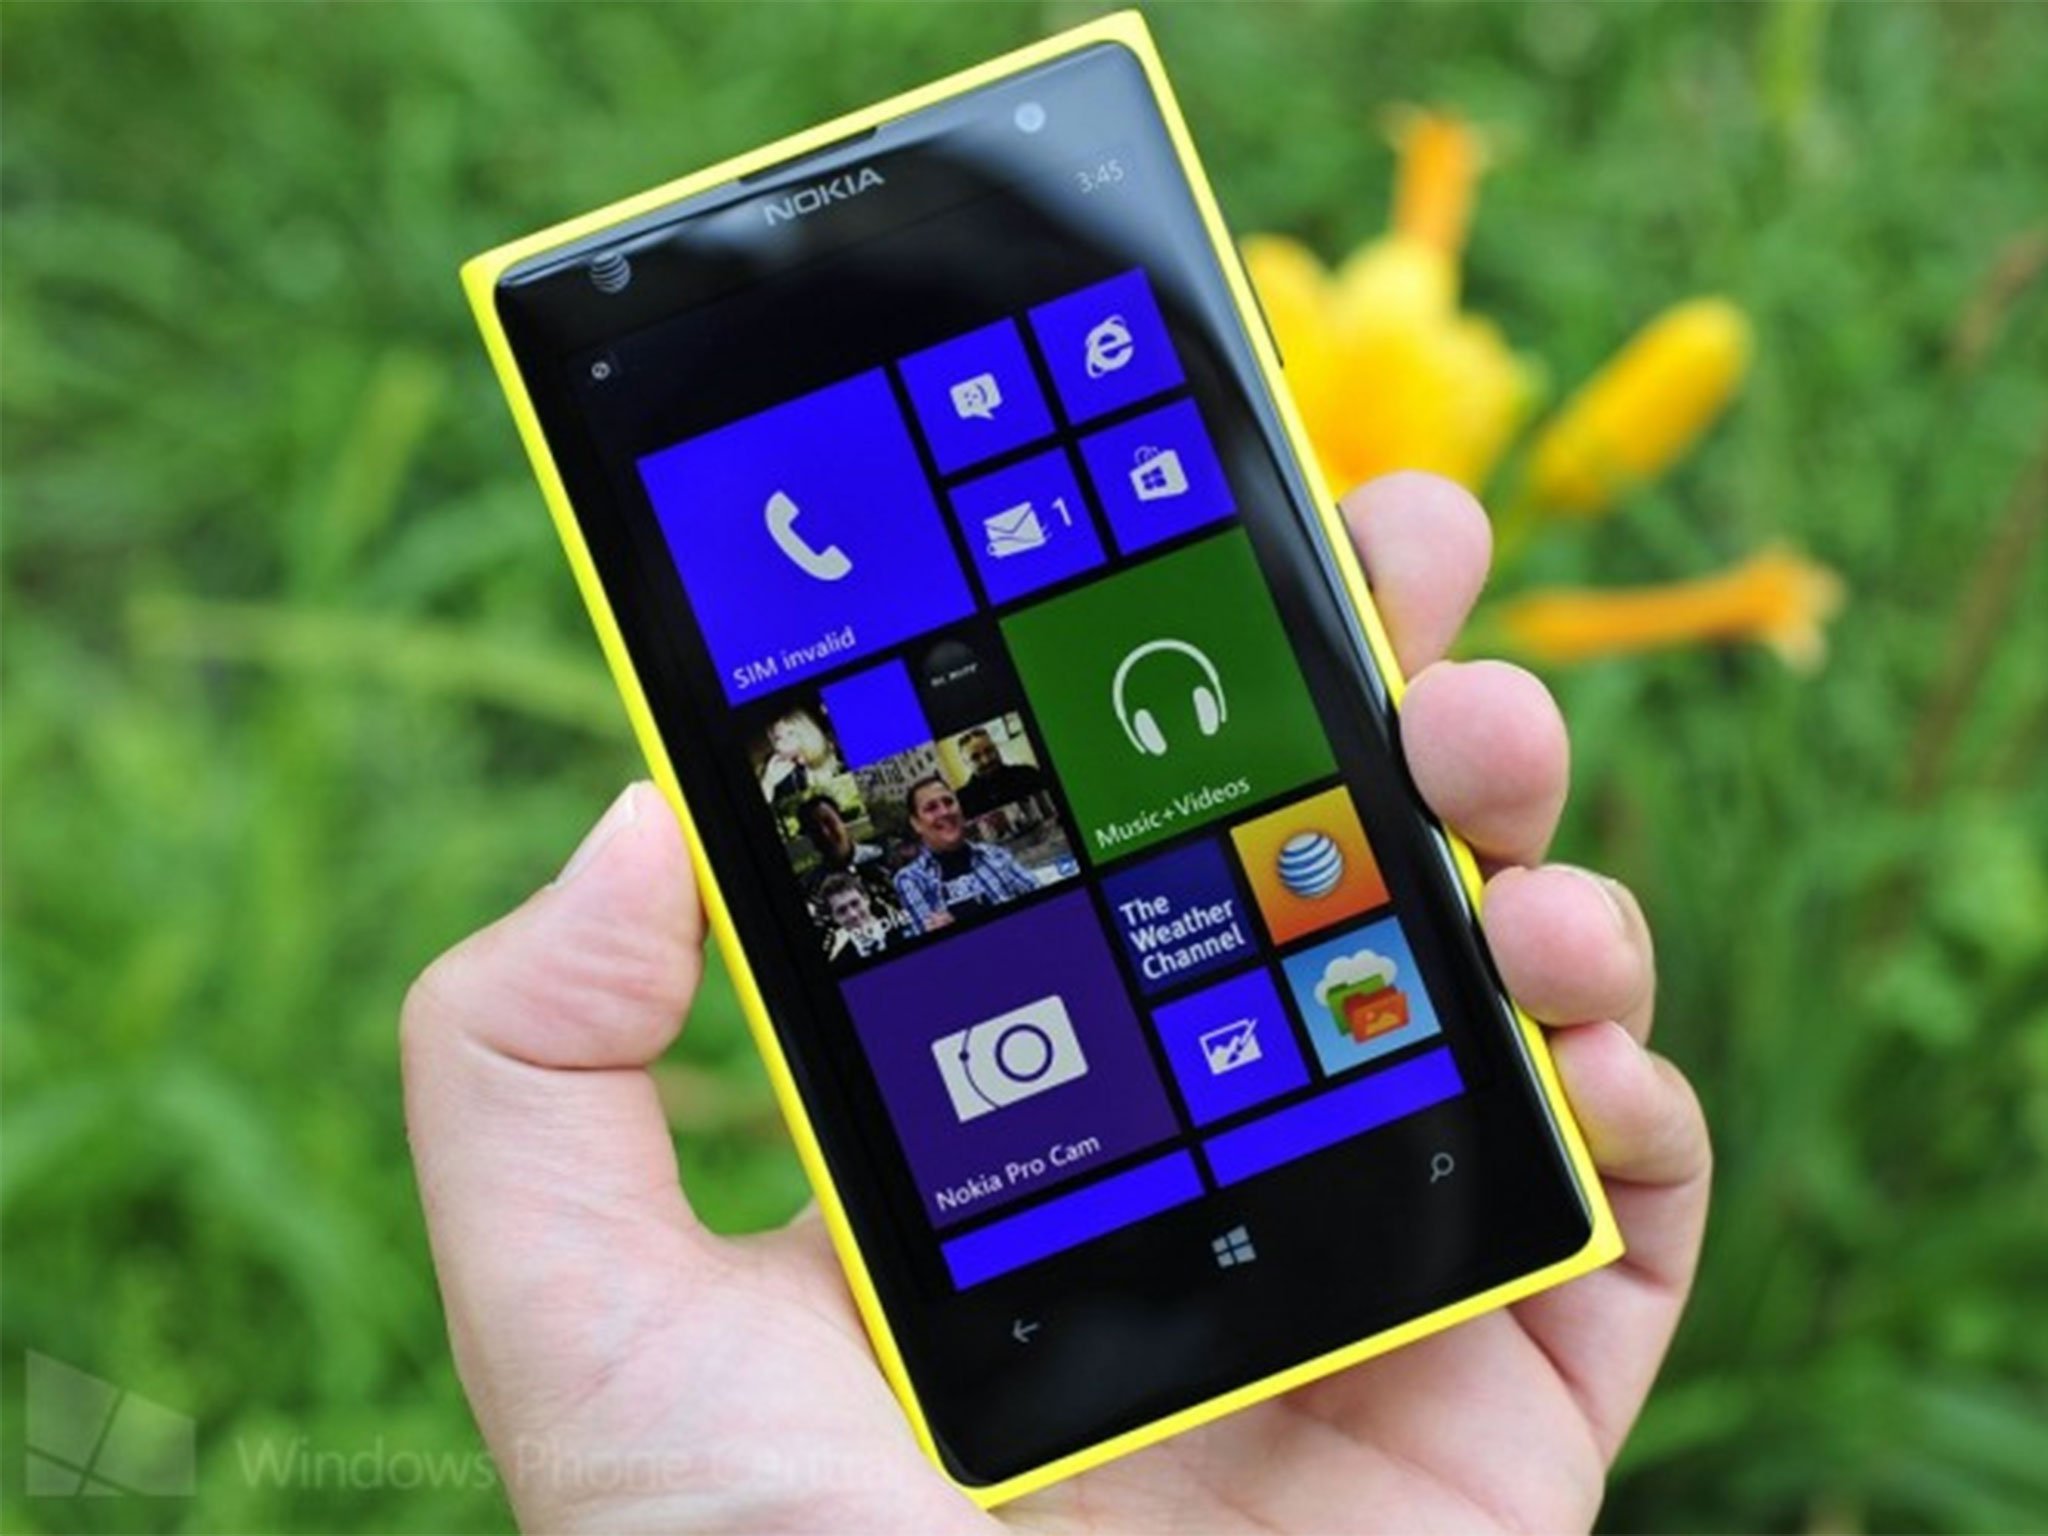 Who should get Windows Phone instead?